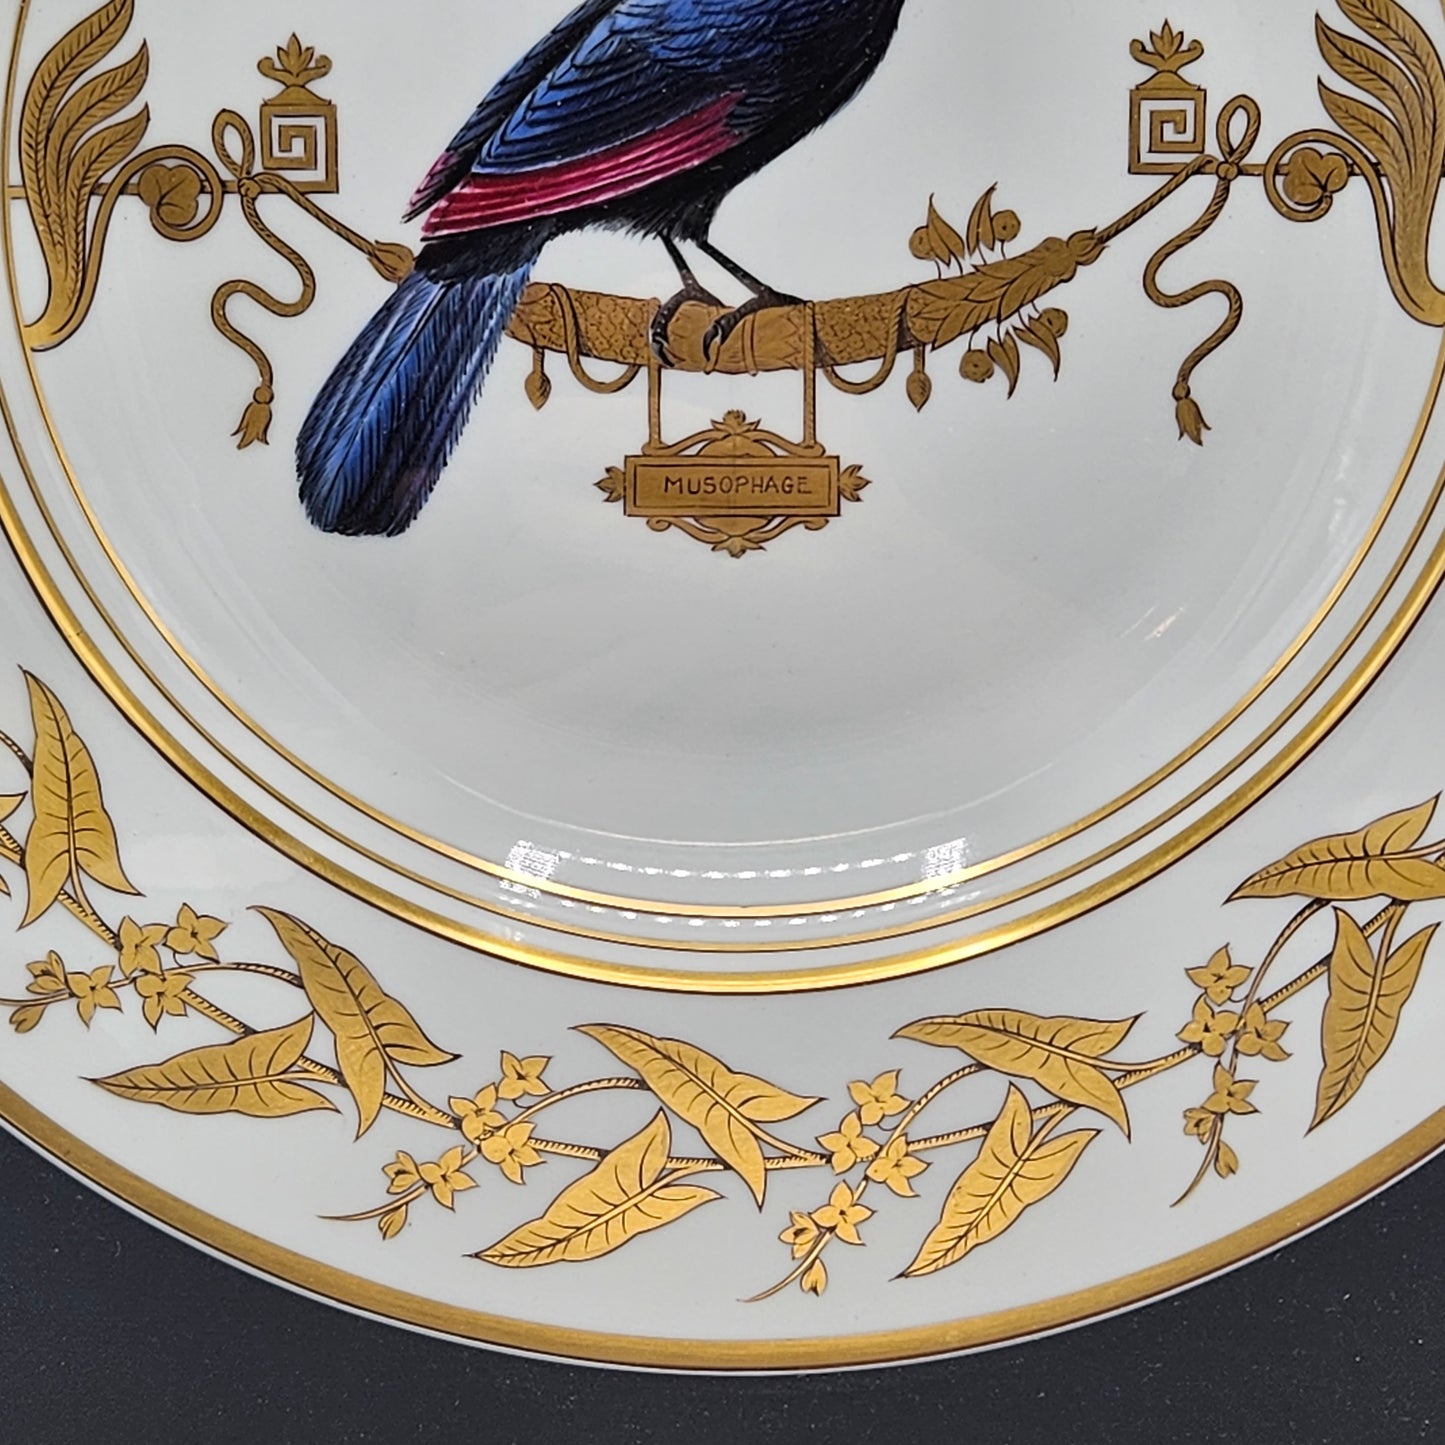 Stunning Rouard French Porcelain Handpainted Bird Plate in Frame